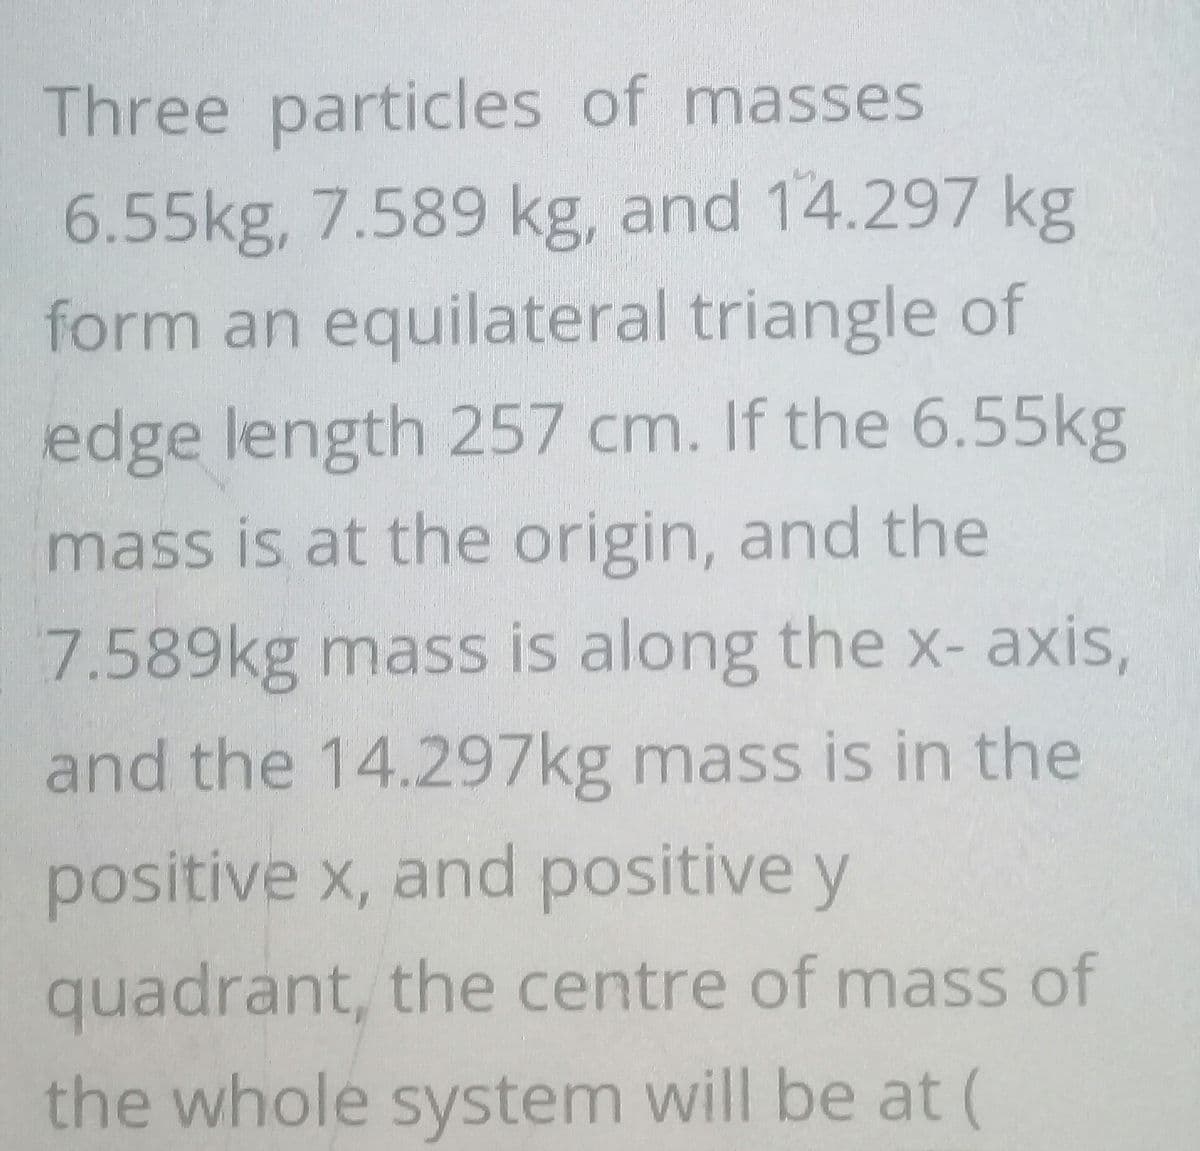 Three particles of masses
6.55kg, 7.589 kg, and 14.297 kg
form an equilateral triangle of
edge length 257 cm. If the 6.55kg
mass is at the origin, and the
7.589kg mass is along the x- axis,
and the 14.297kg mass is in the
positive x, and positive y
quadrant, the centre of mass of
the whole system will be at (